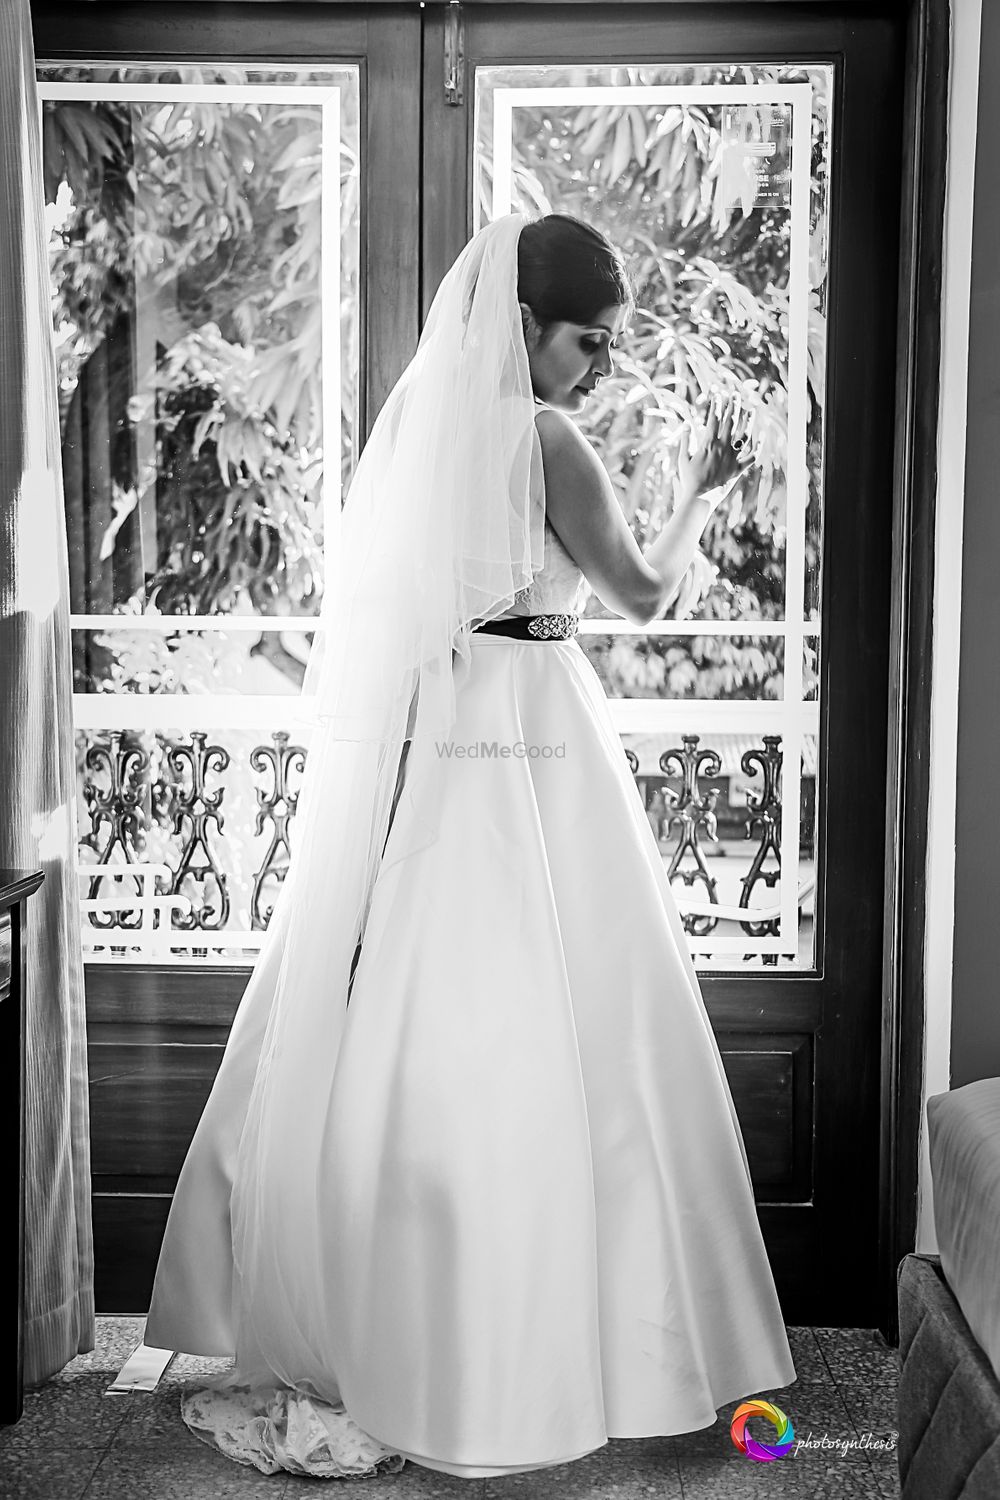 Photo From Intimate Wedding of Danny & Savina - By Photosynthesis Photography Services